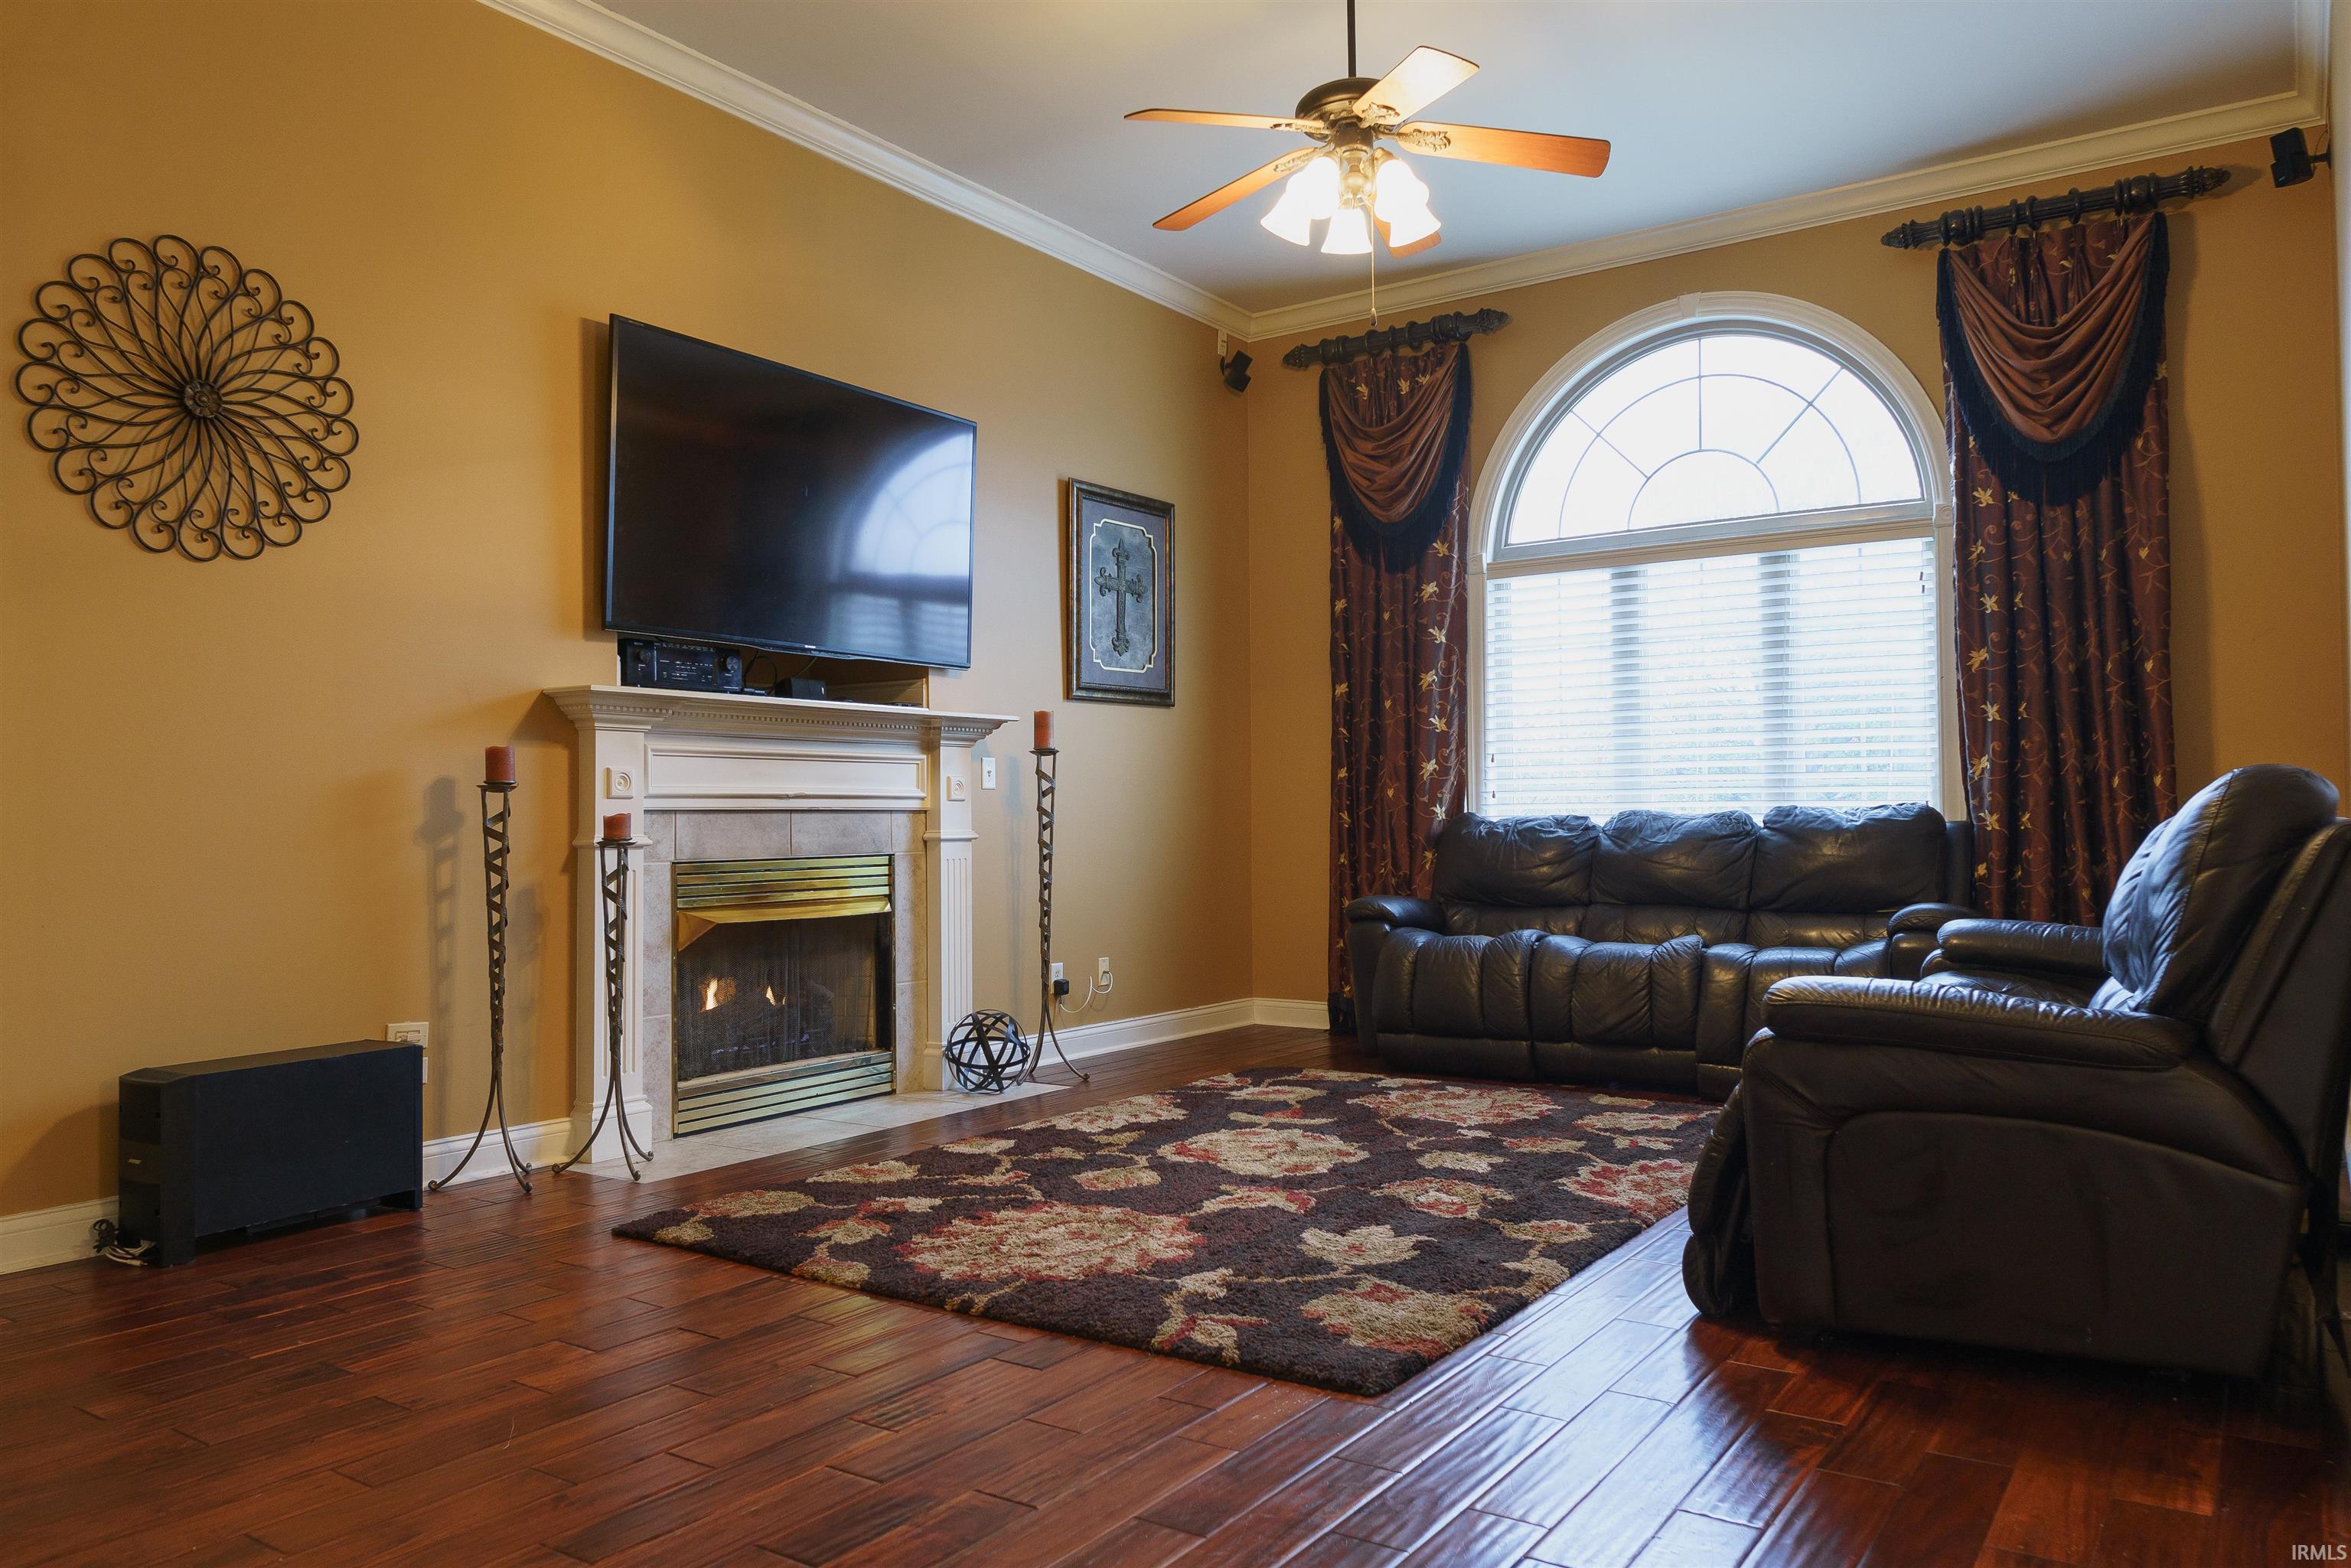 Beautiful floors, gas log fireplace, arched windows